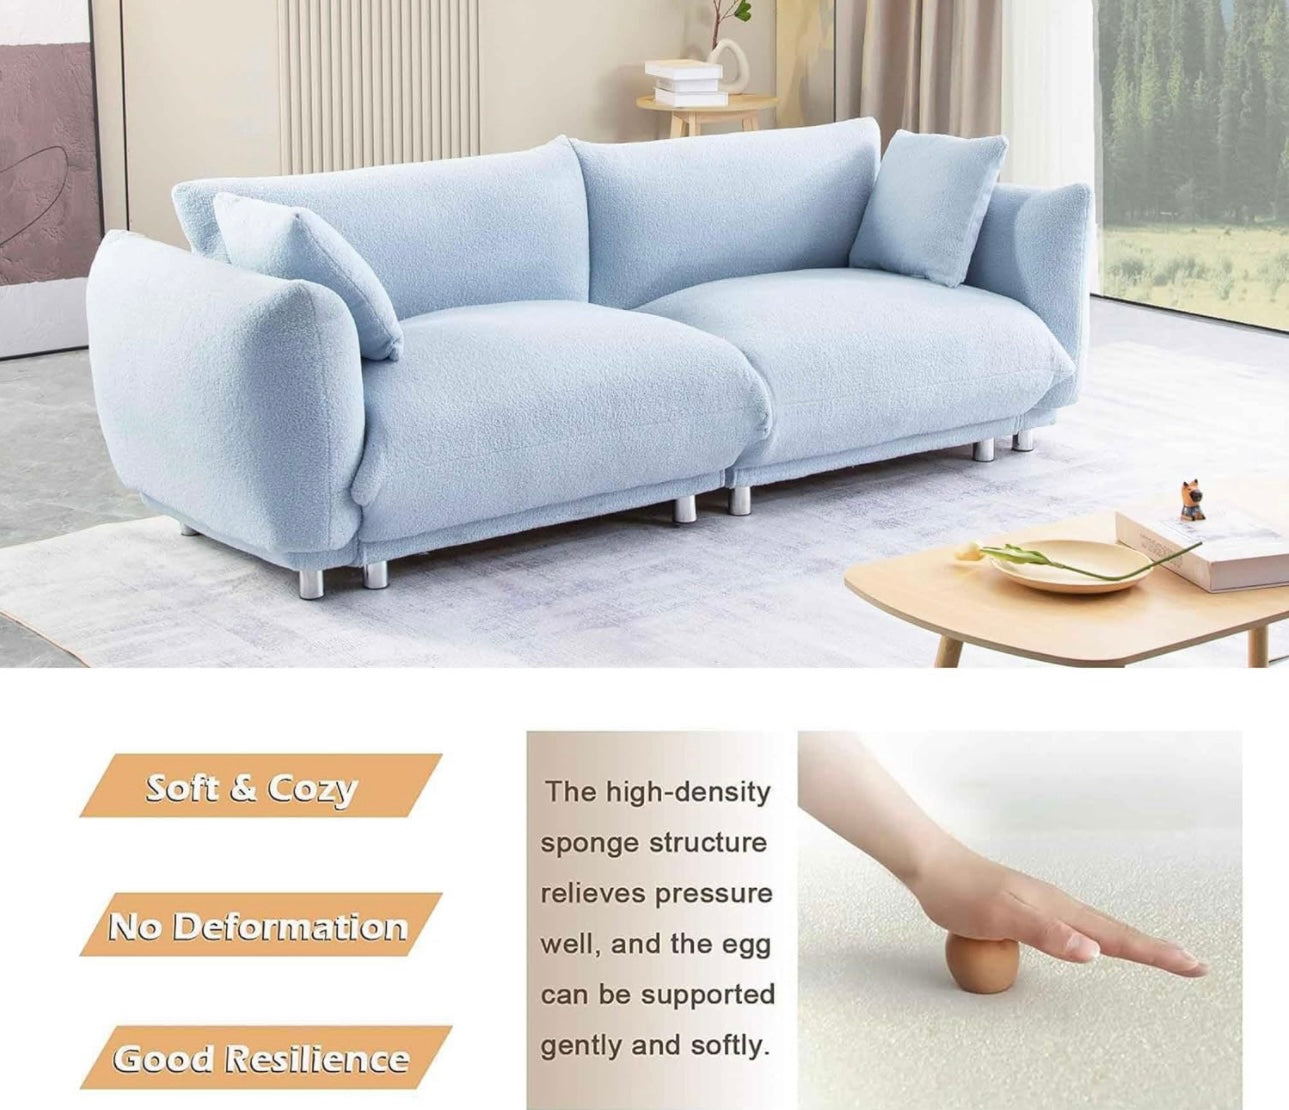 87 inch Modern Sofa, Teddy Comfy Sofa Couch with 2 Pillows, Upholstered Deep Seat Sofa, Oversized Sofa with Metal Legs for Small Space Office Apartments Bedroom Living Room (Blue)